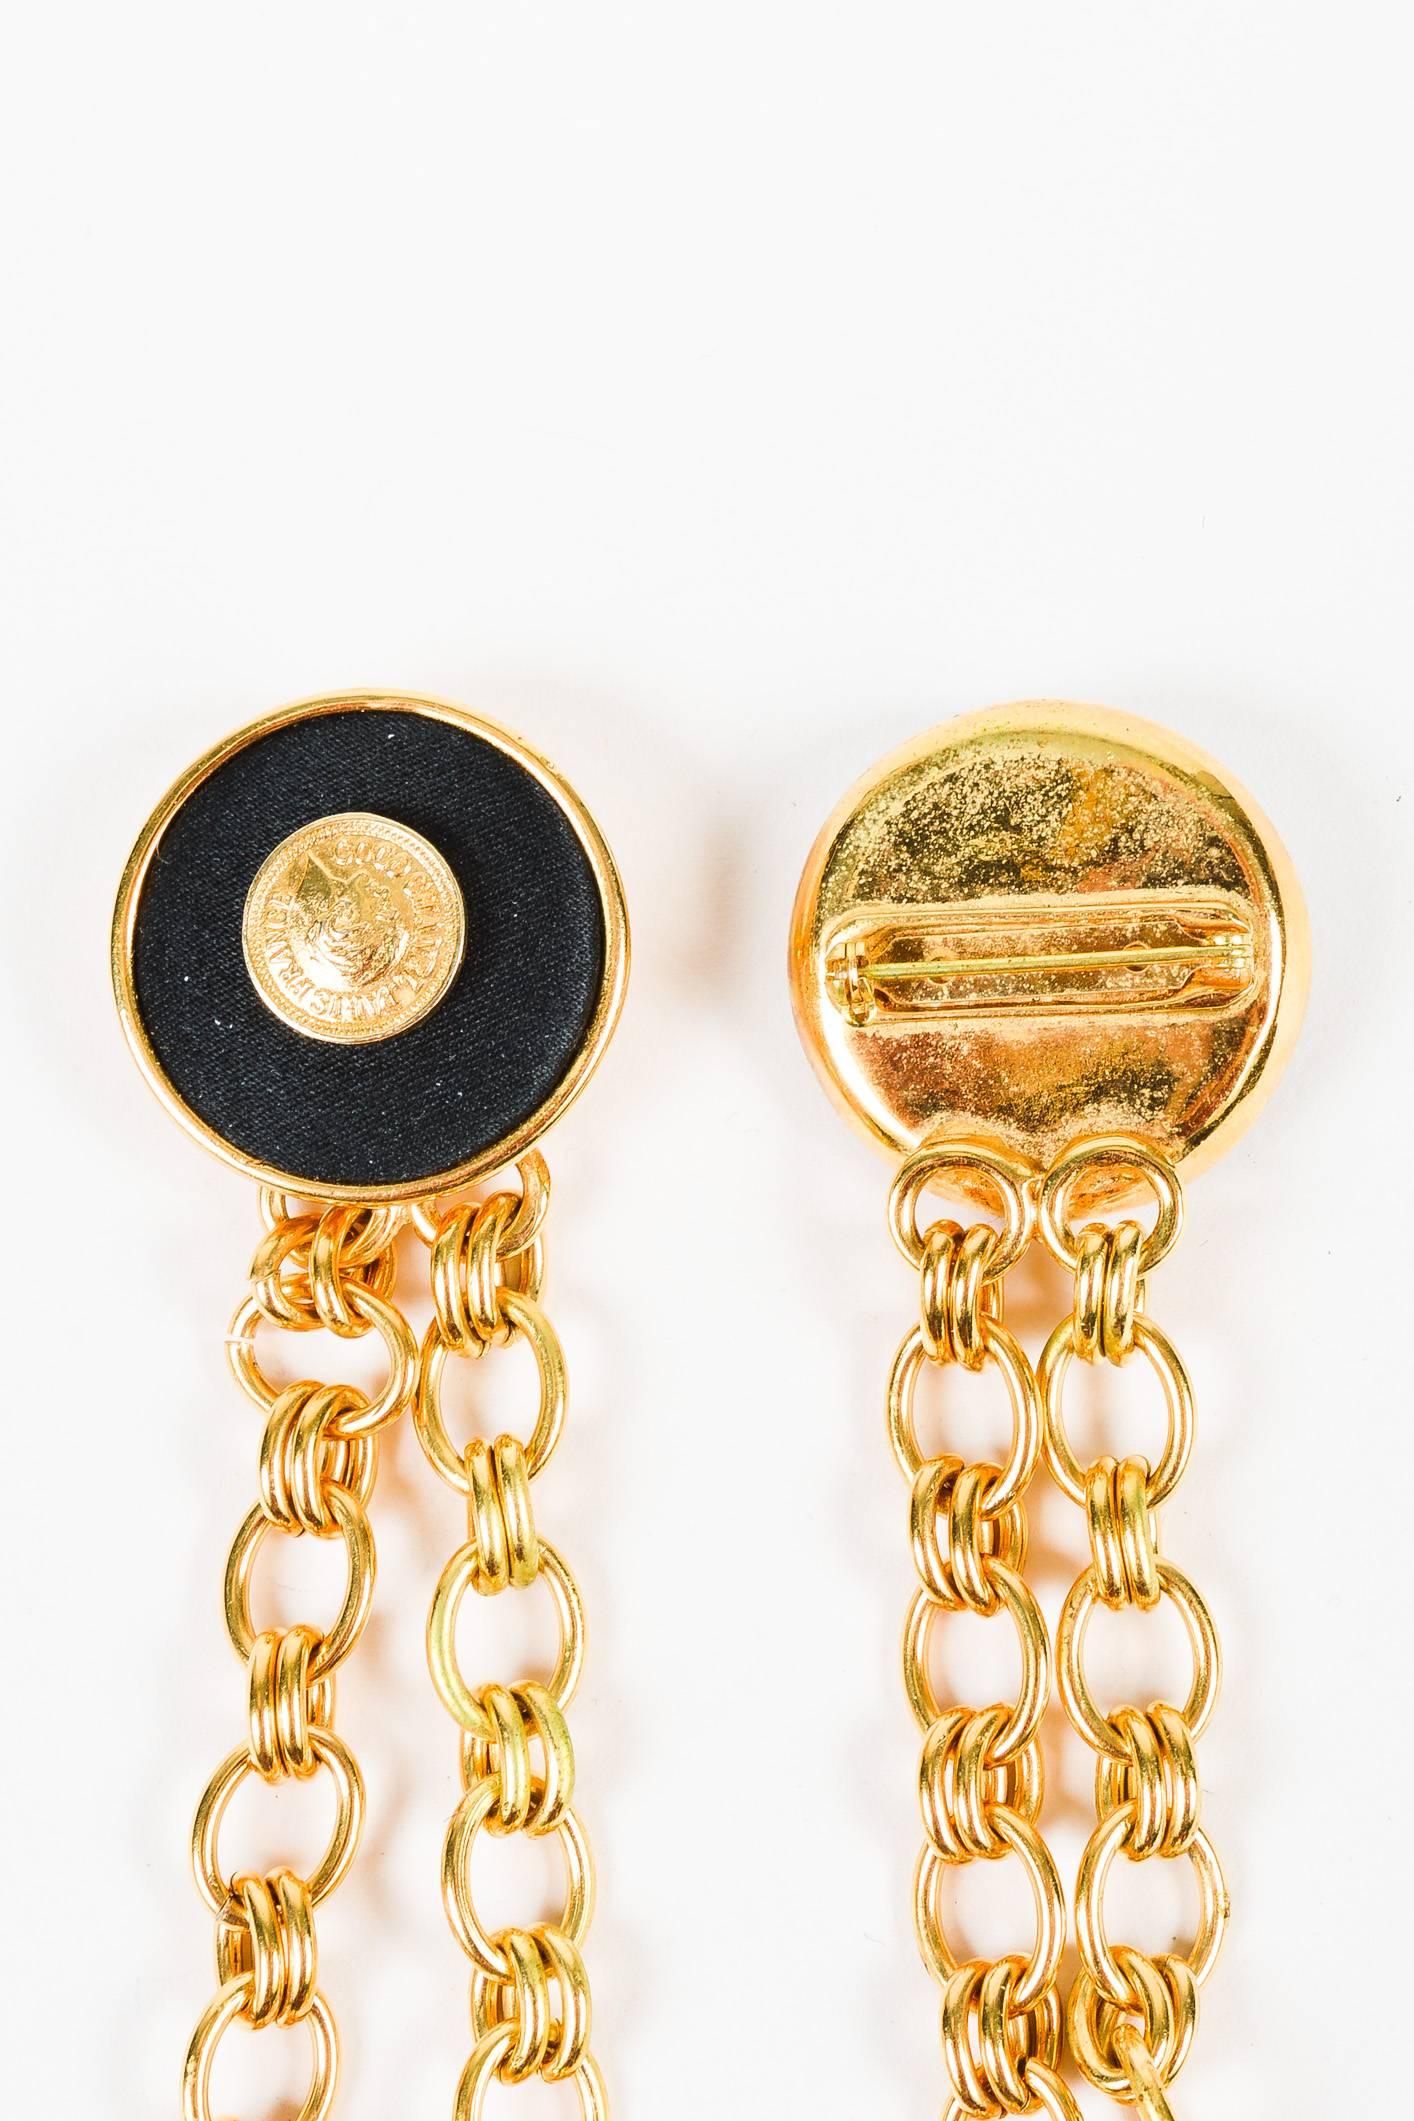 Vintage brooch with a unique flair. Gold-tone metal construction; polished finish. Satin covered medallions with 